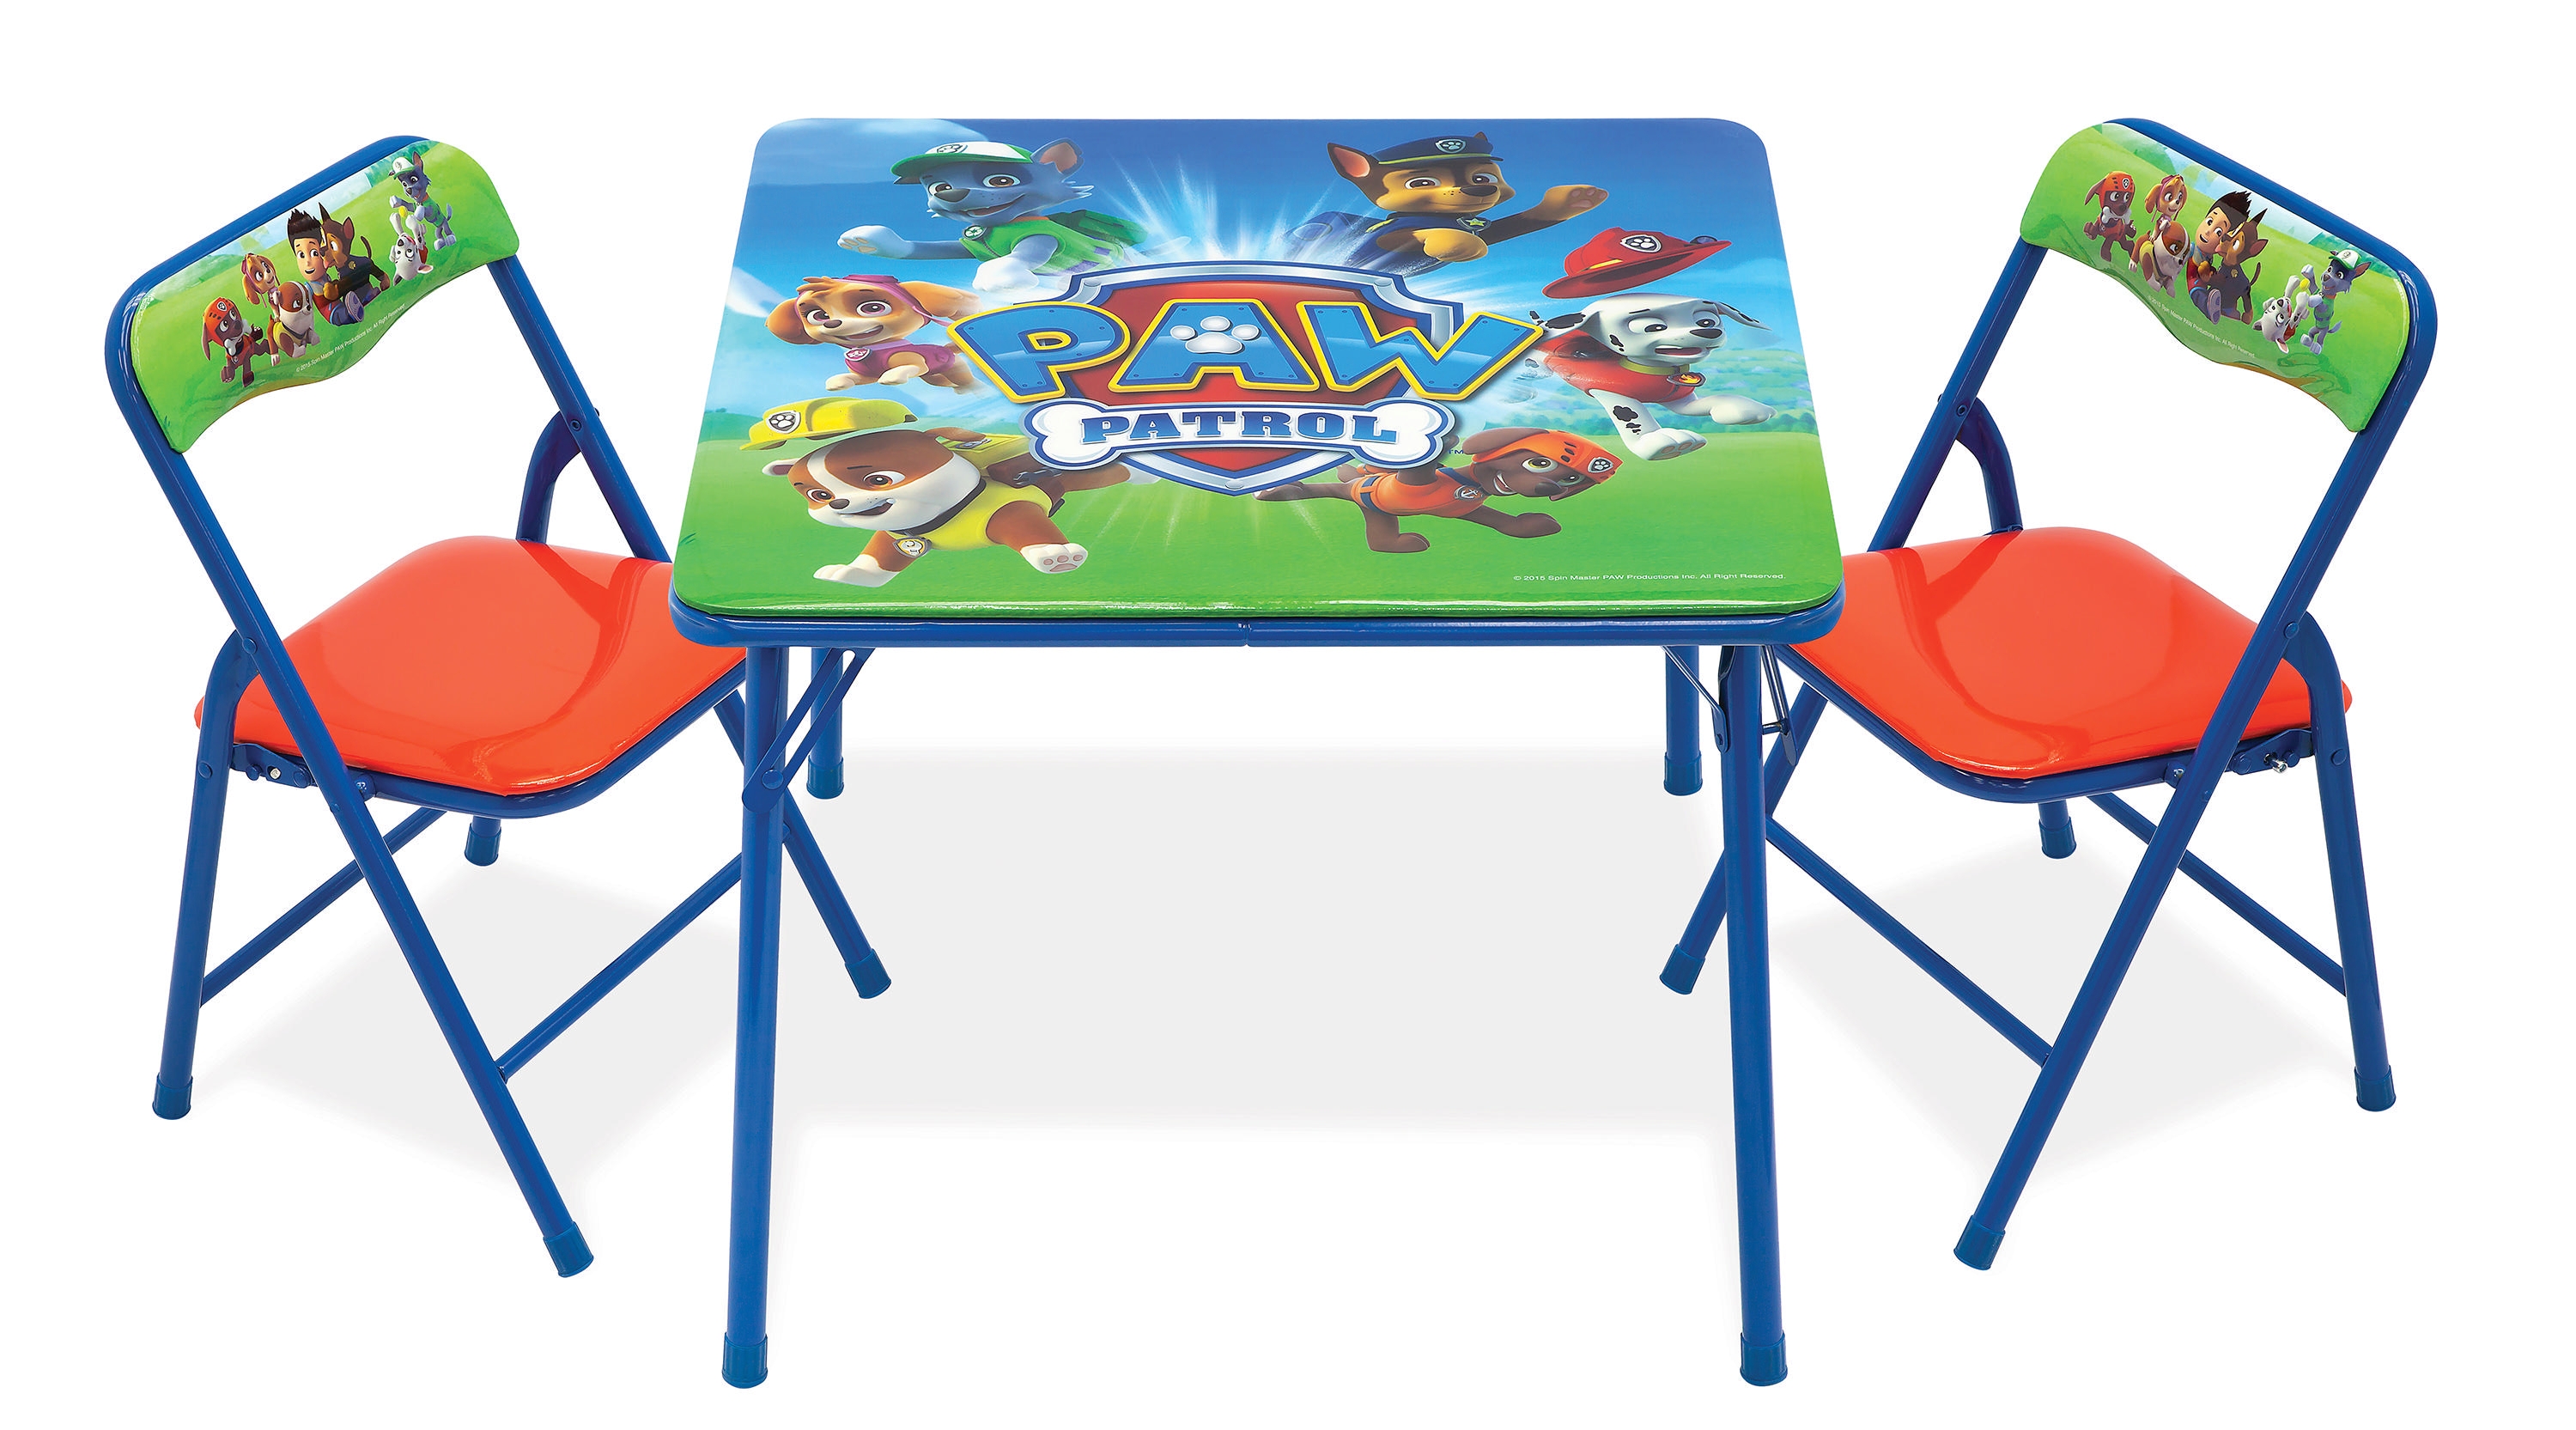 baby toddler kids table chair sets activity play toys r us babies next steps and